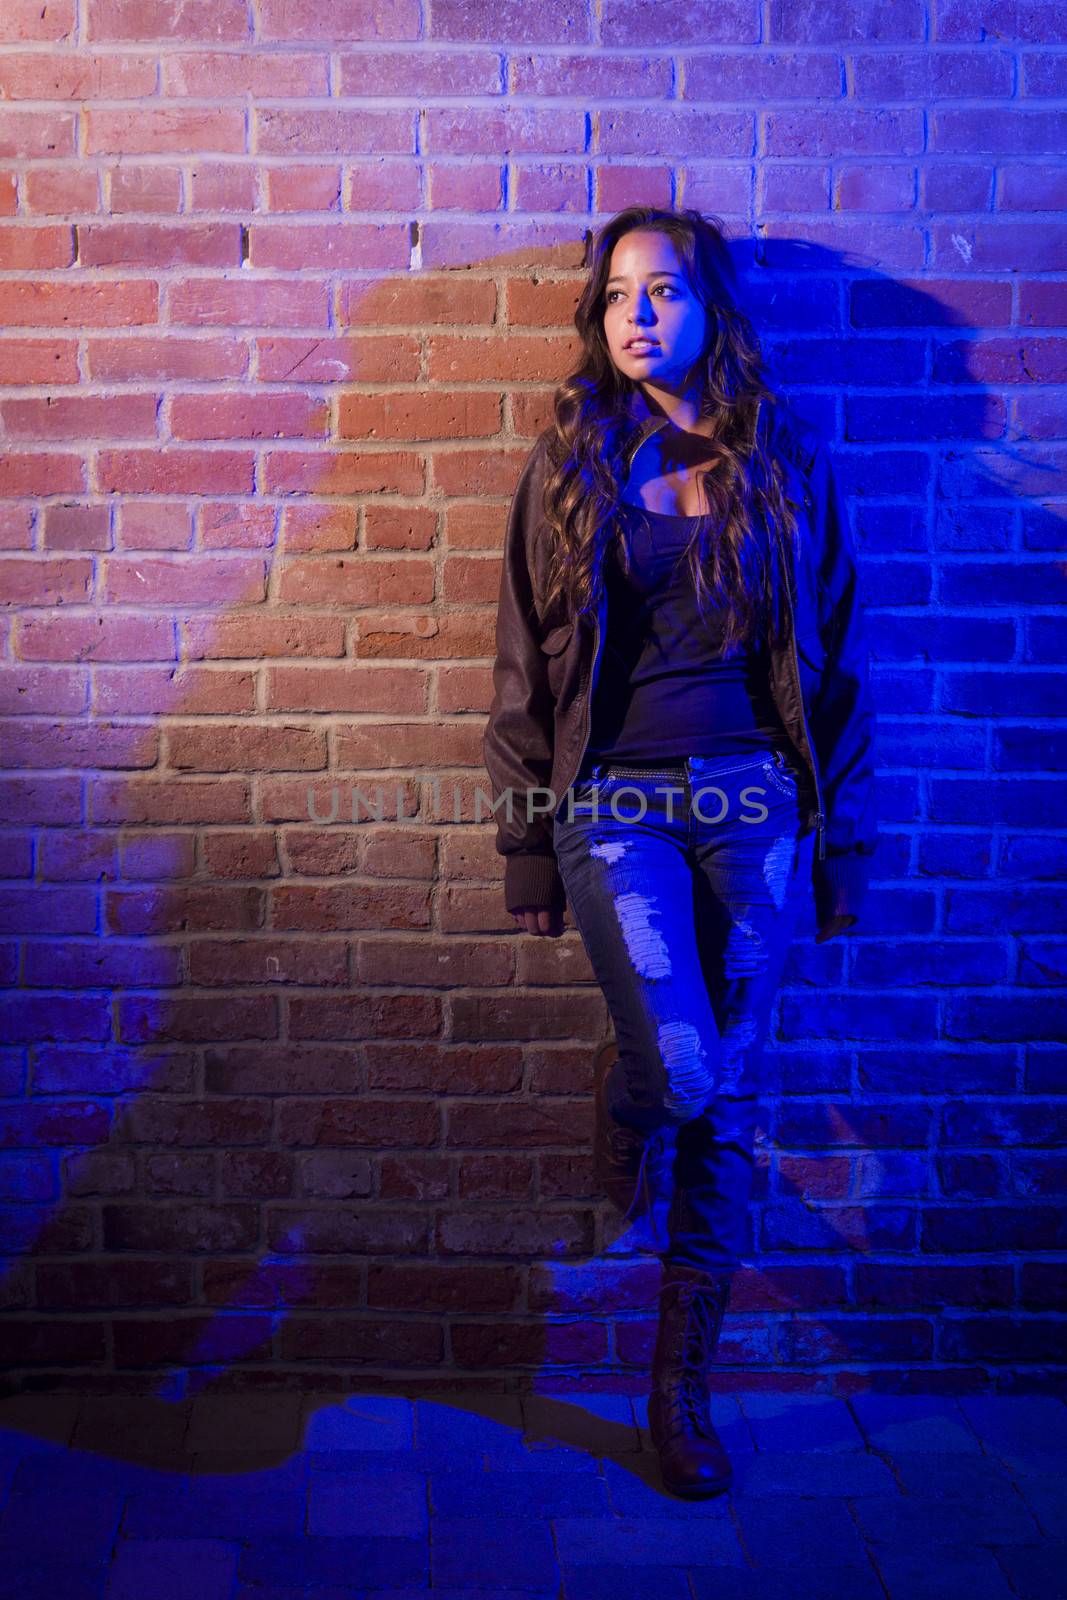 Portrait of a Pretty Mixed Race Young Adult Woman Against a Brick Wall Background.